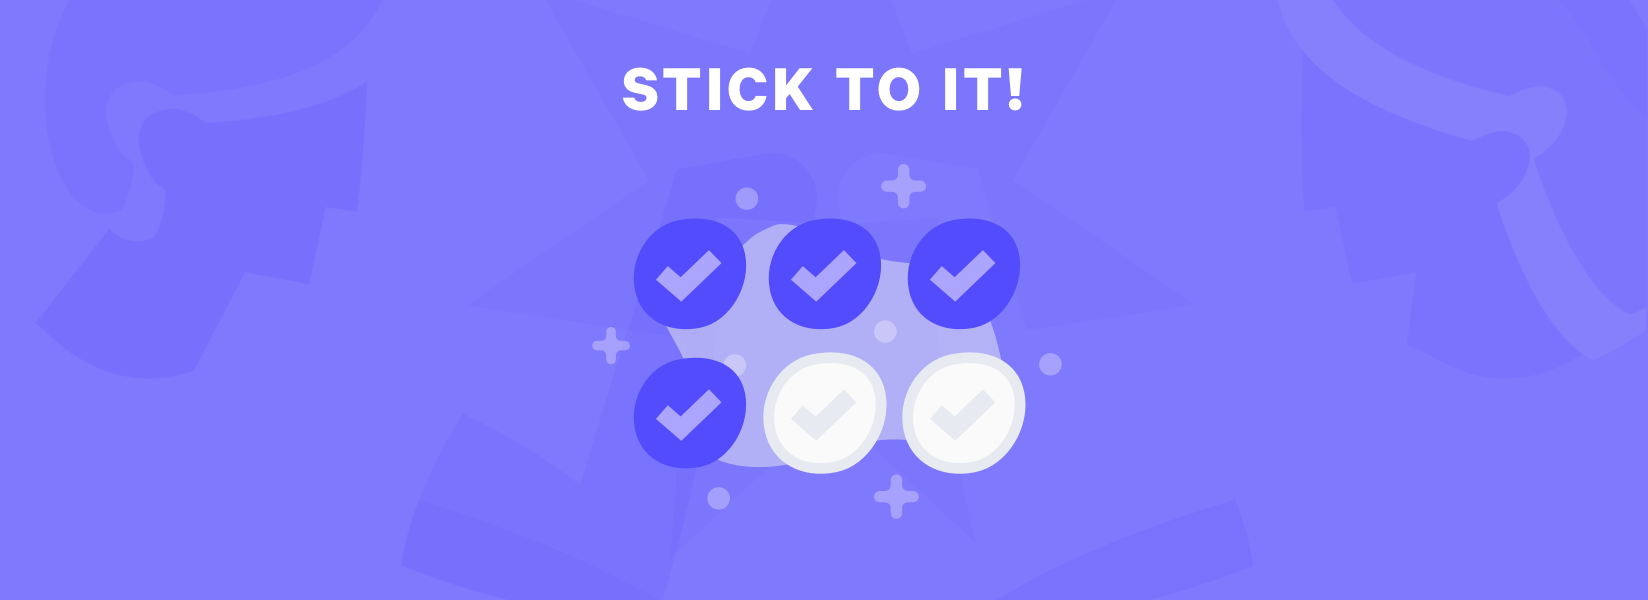 stick to it graphic